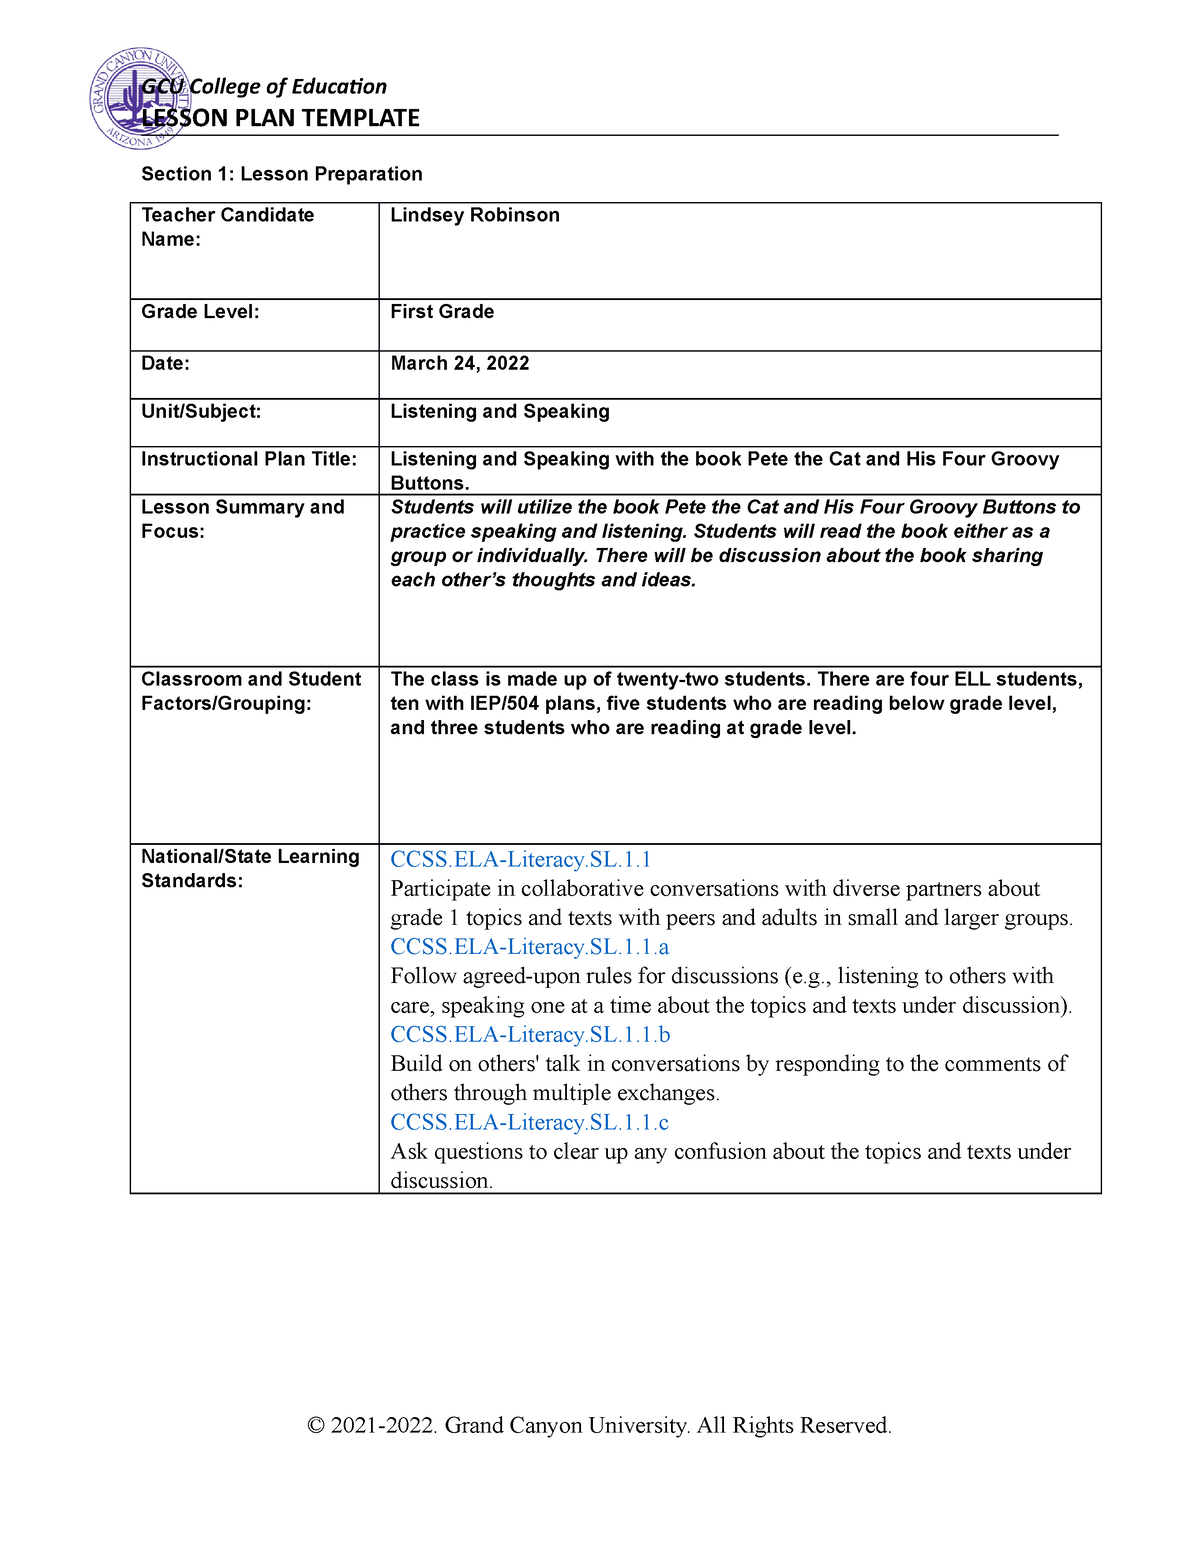 Coe lesson plan template LESSON PLAN TEMPLATE Section 1 Lesson